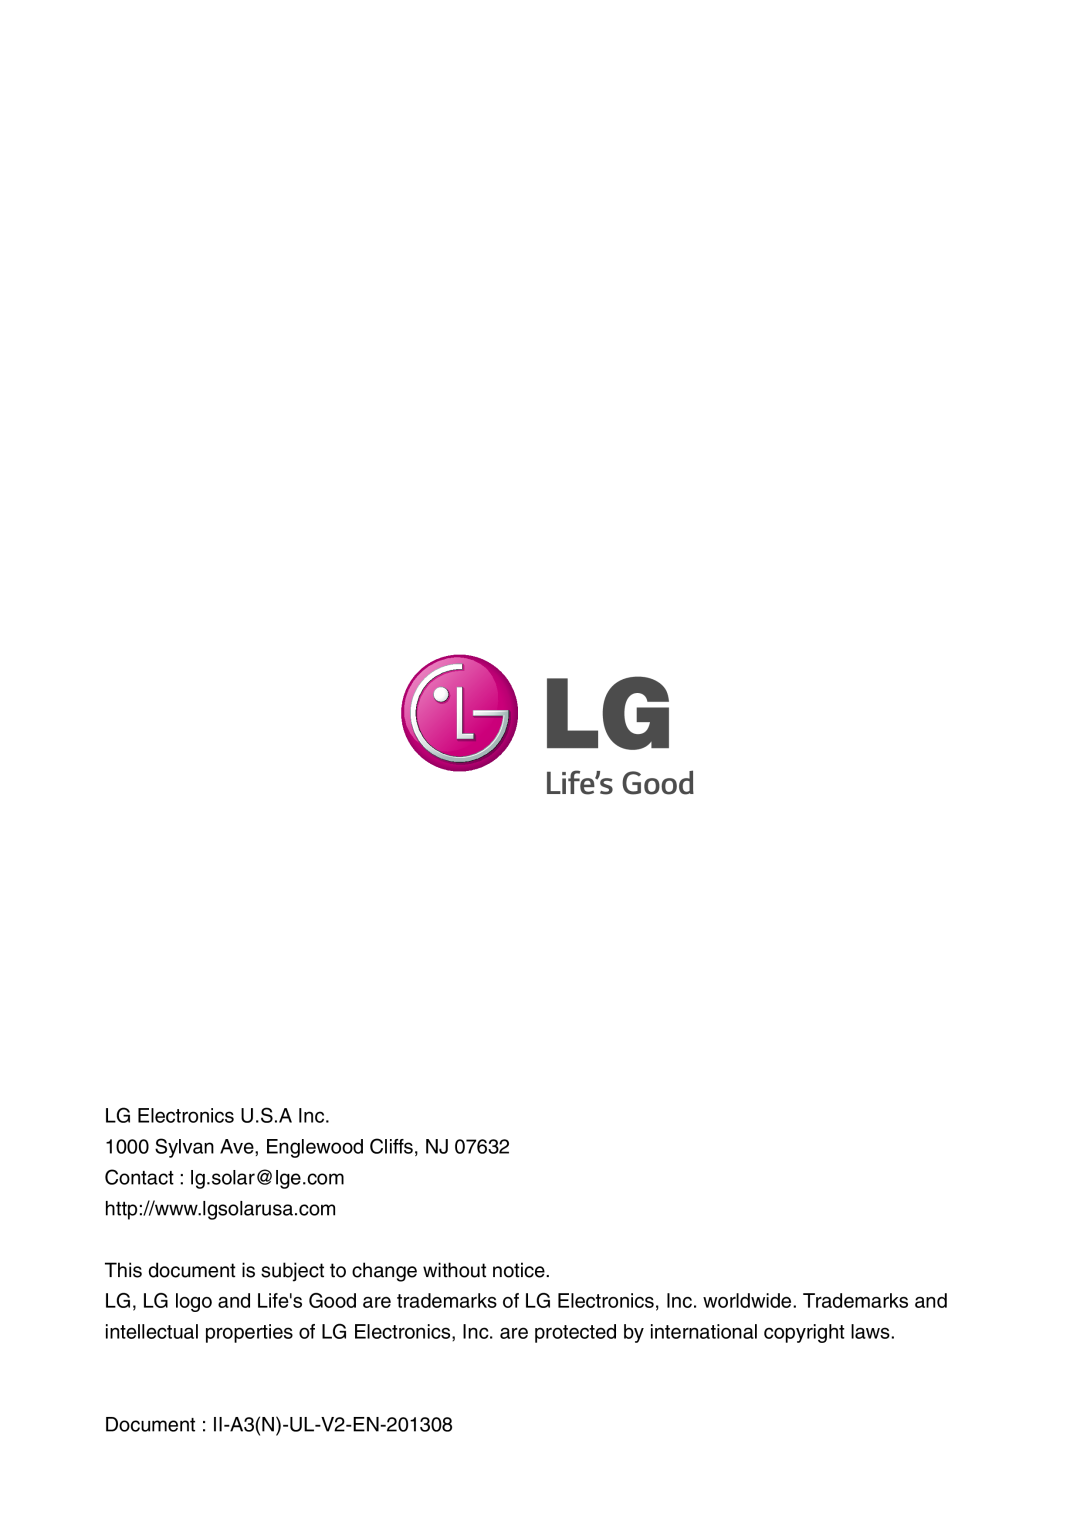 LG Electronics K)-B3, K)-A3, LGXXXN1C(W LG Electronics U.S.A Inc, This document is subject to change without notice 